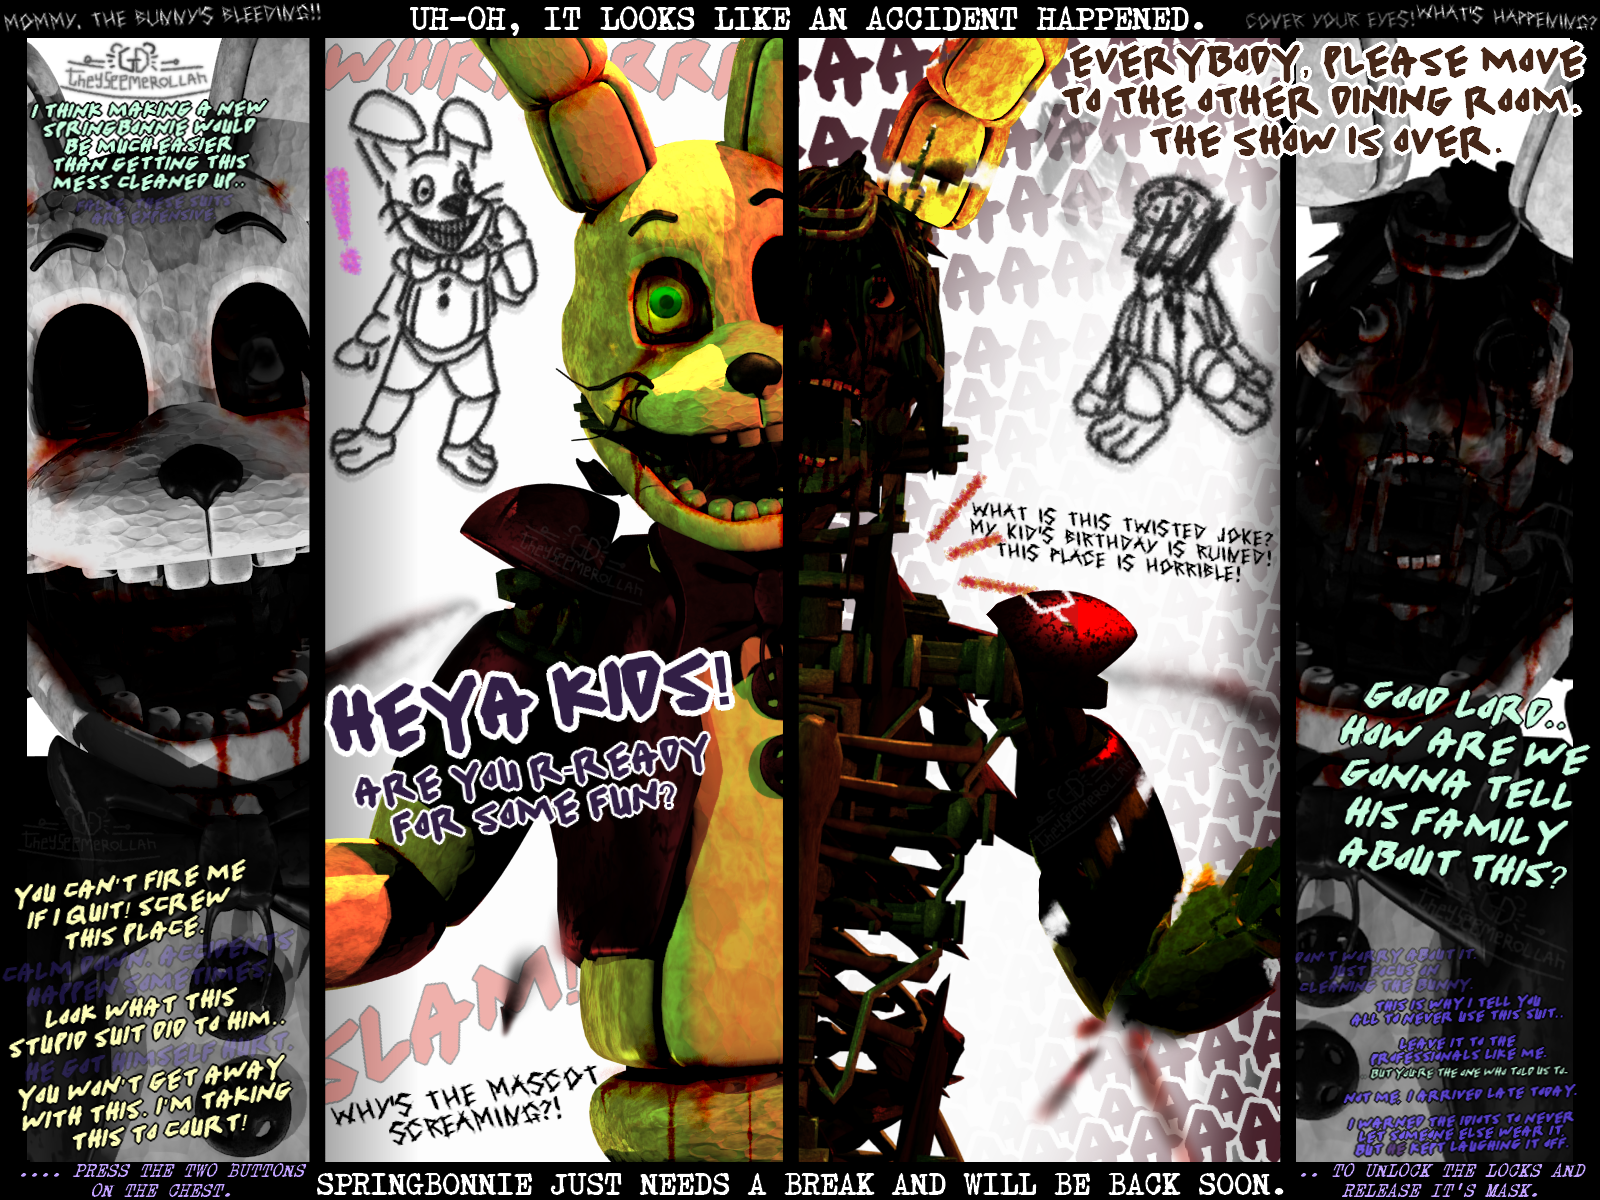 Guess the FNAF LORE QUIZ with Glamrock Bonnie and Glitchtrap 